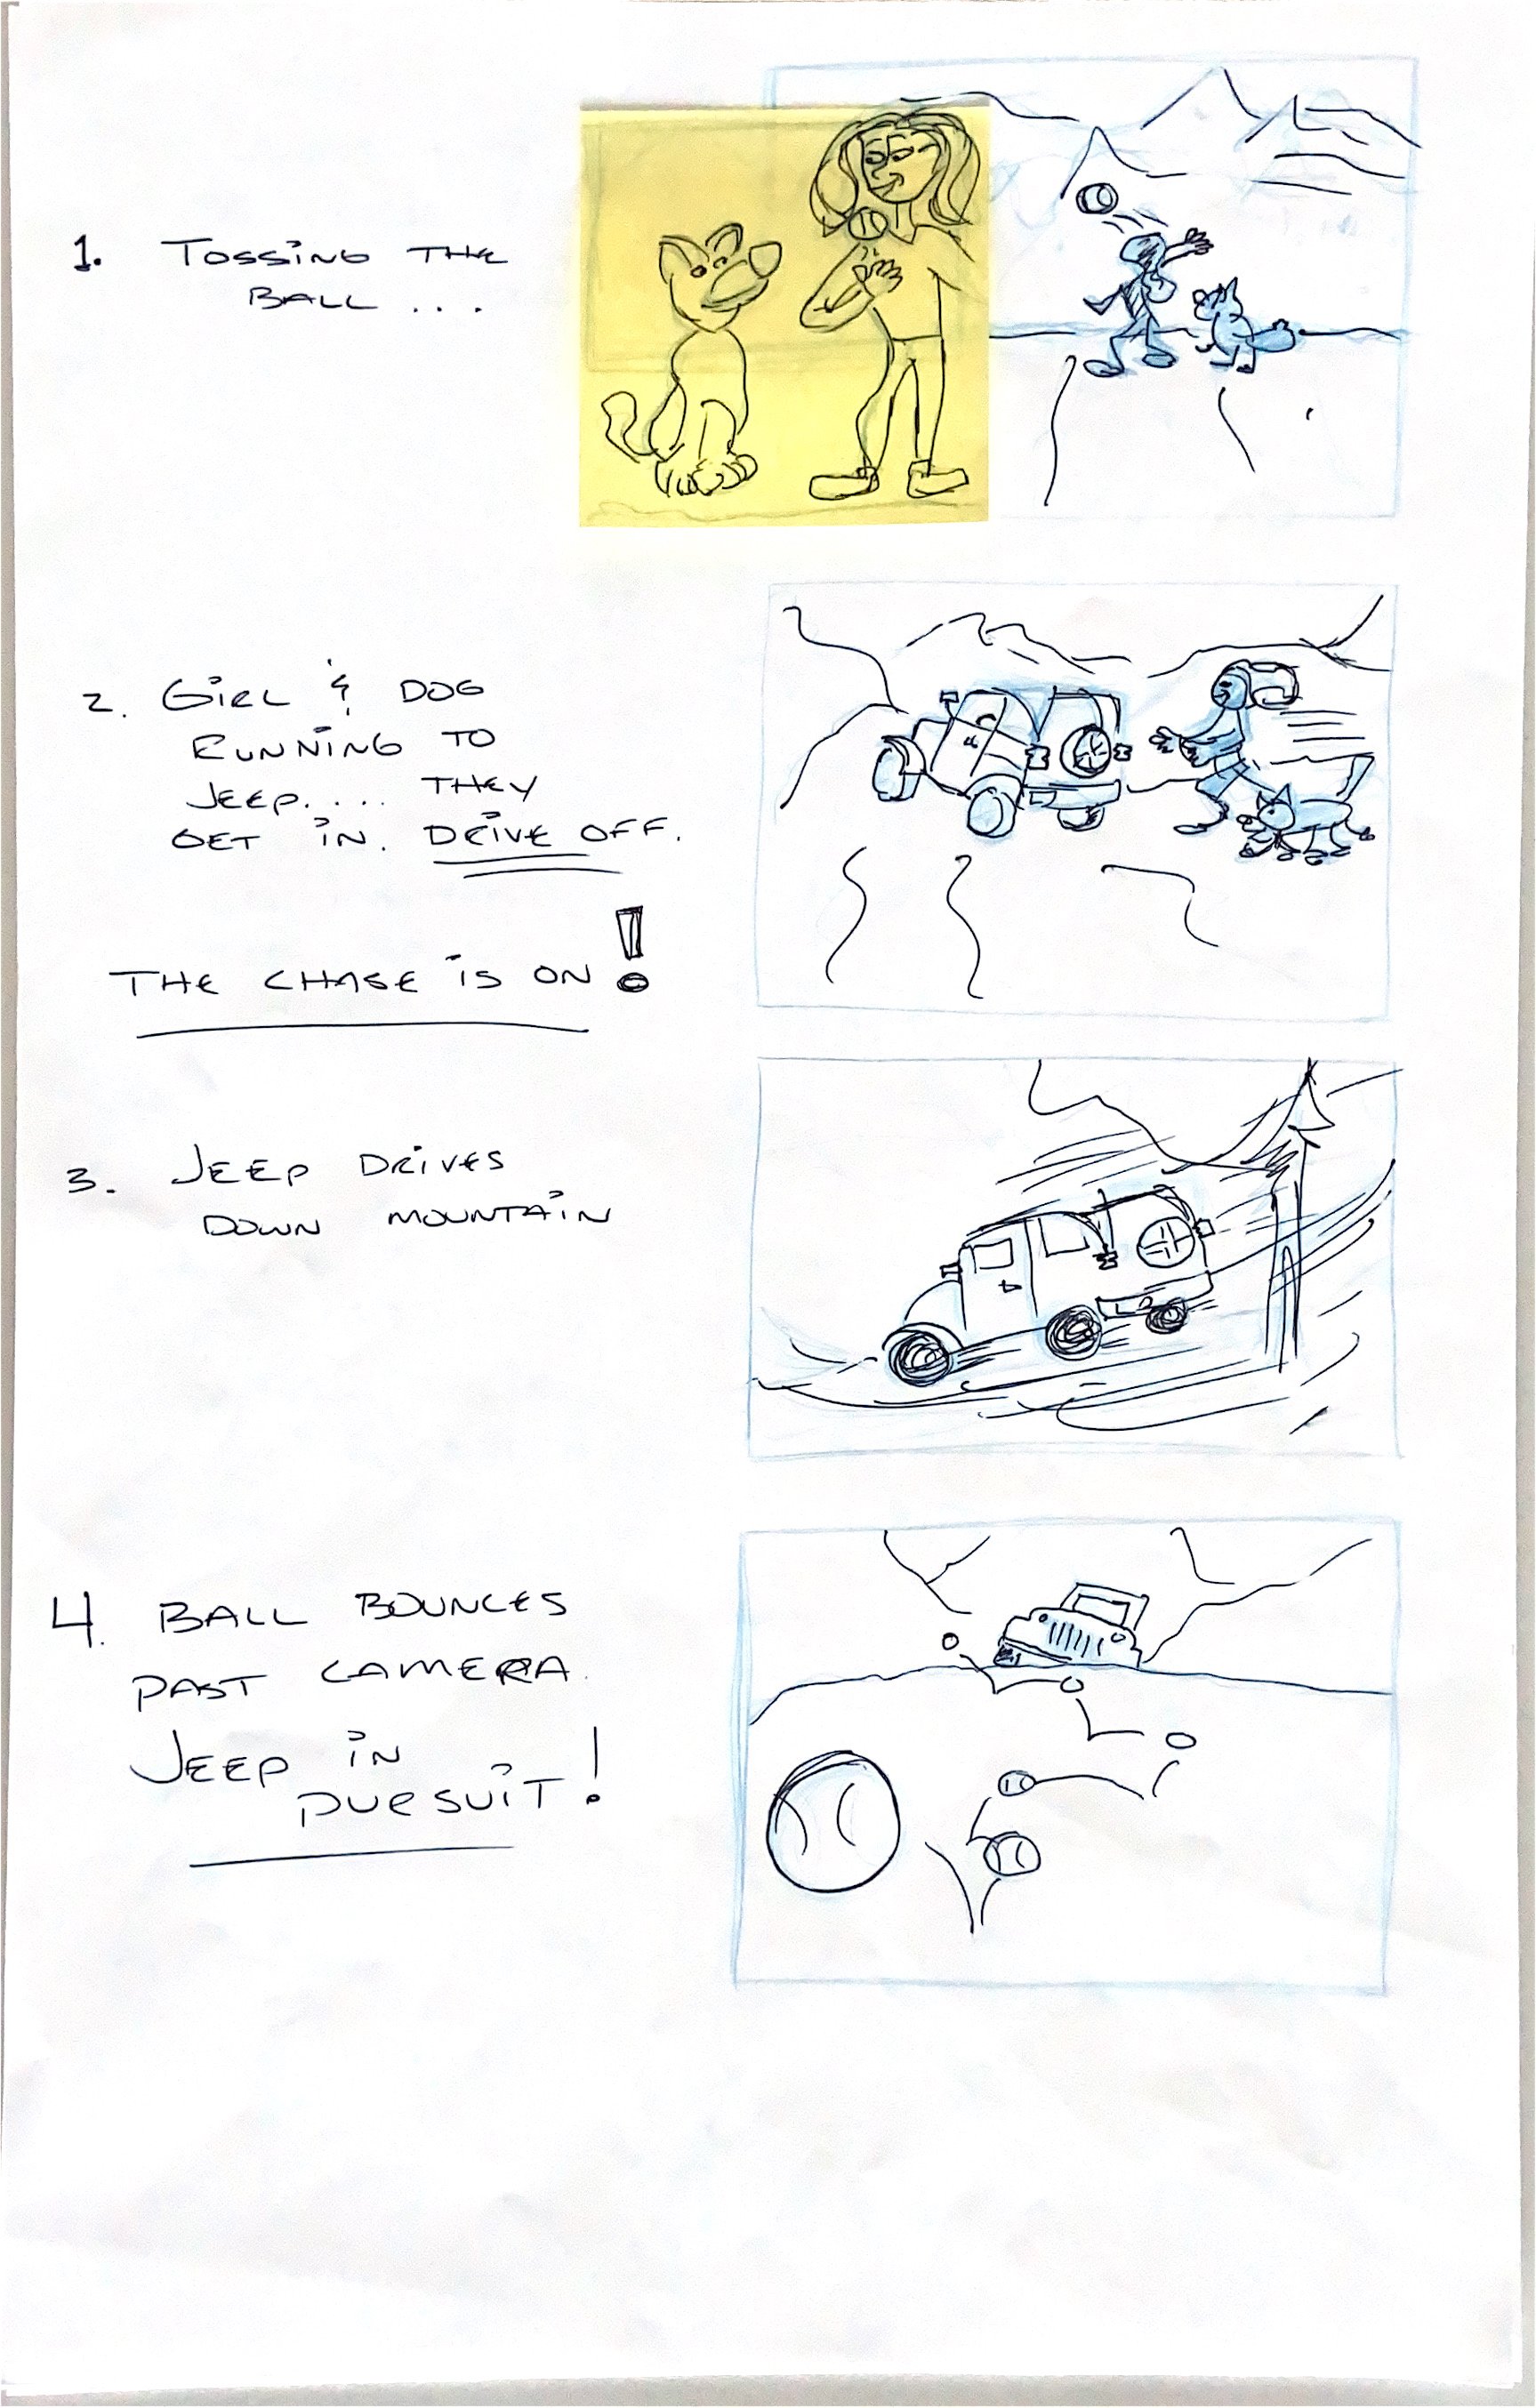 Jeep Fetch Storyboards_Page_1_Image_0001_Johnny Michael.jpg